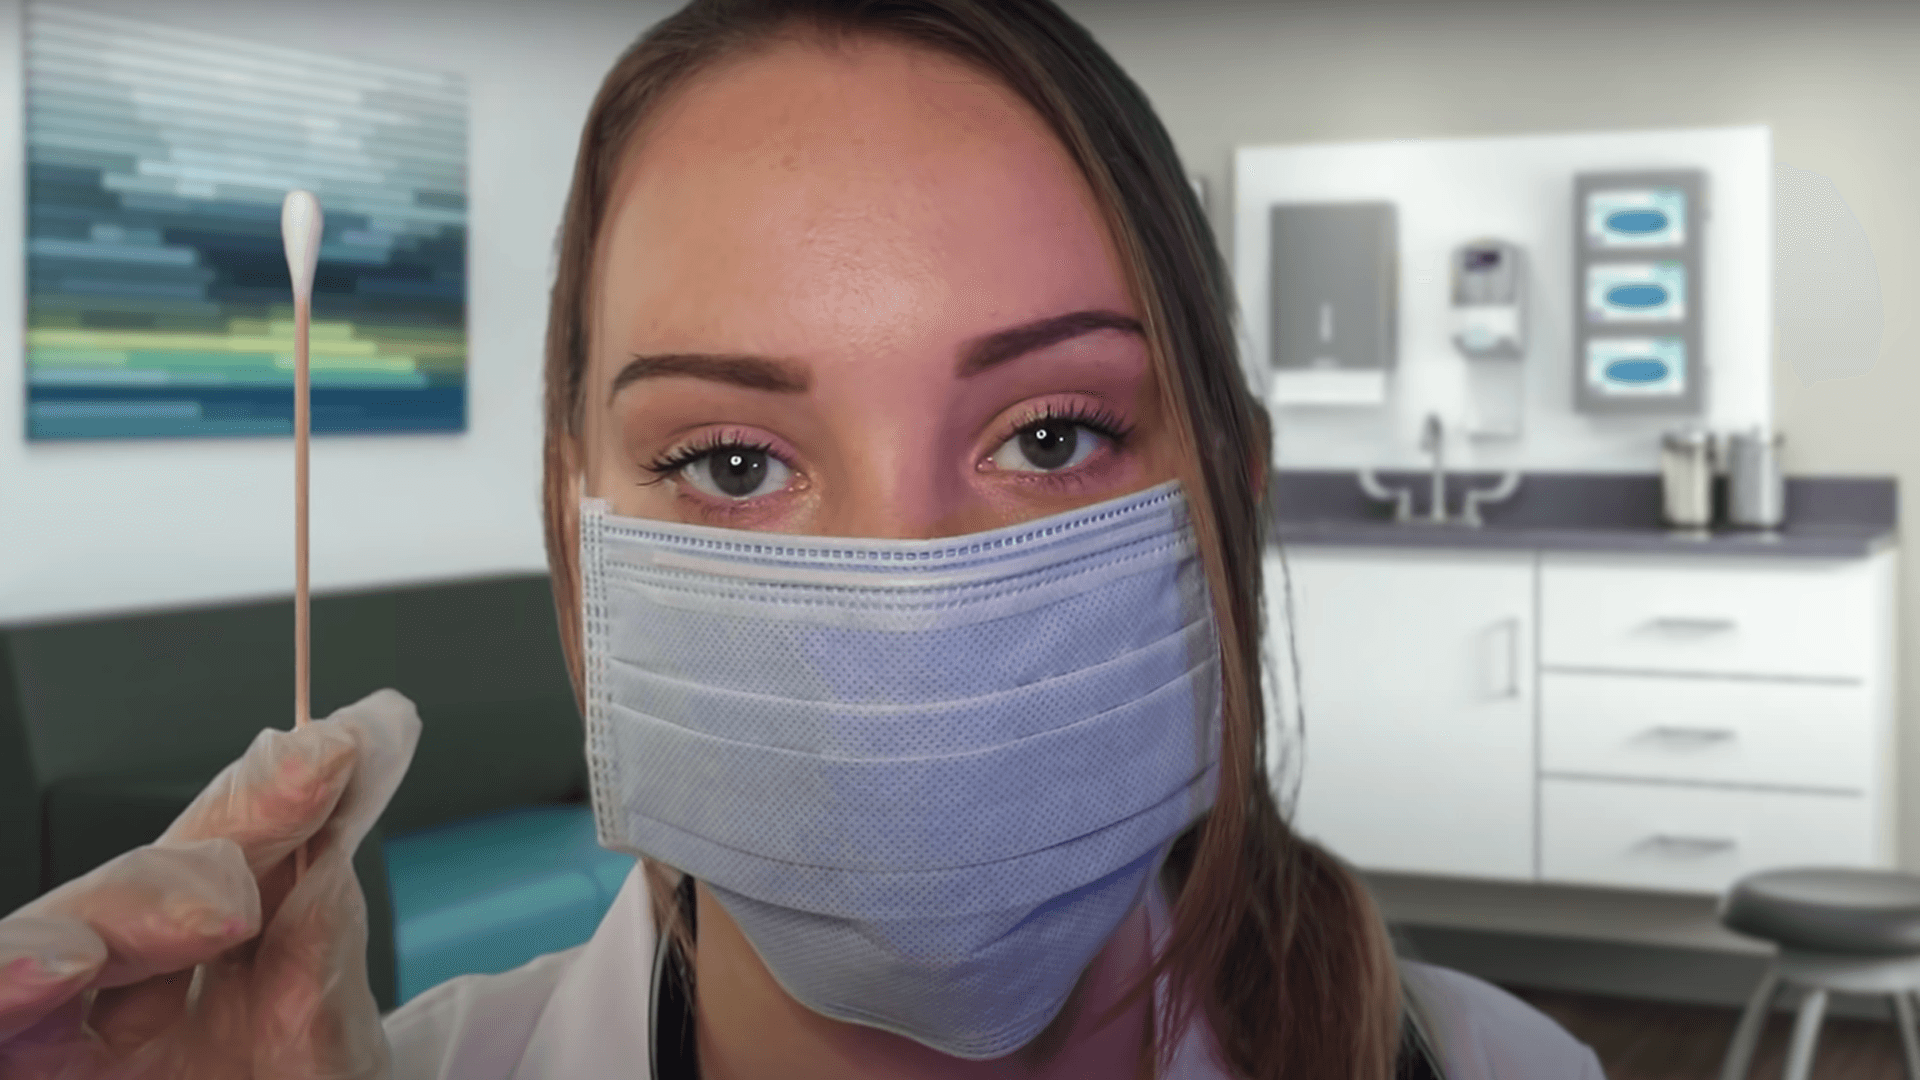 ASMR YouTubers fight testing fears with COVID roleplay videos